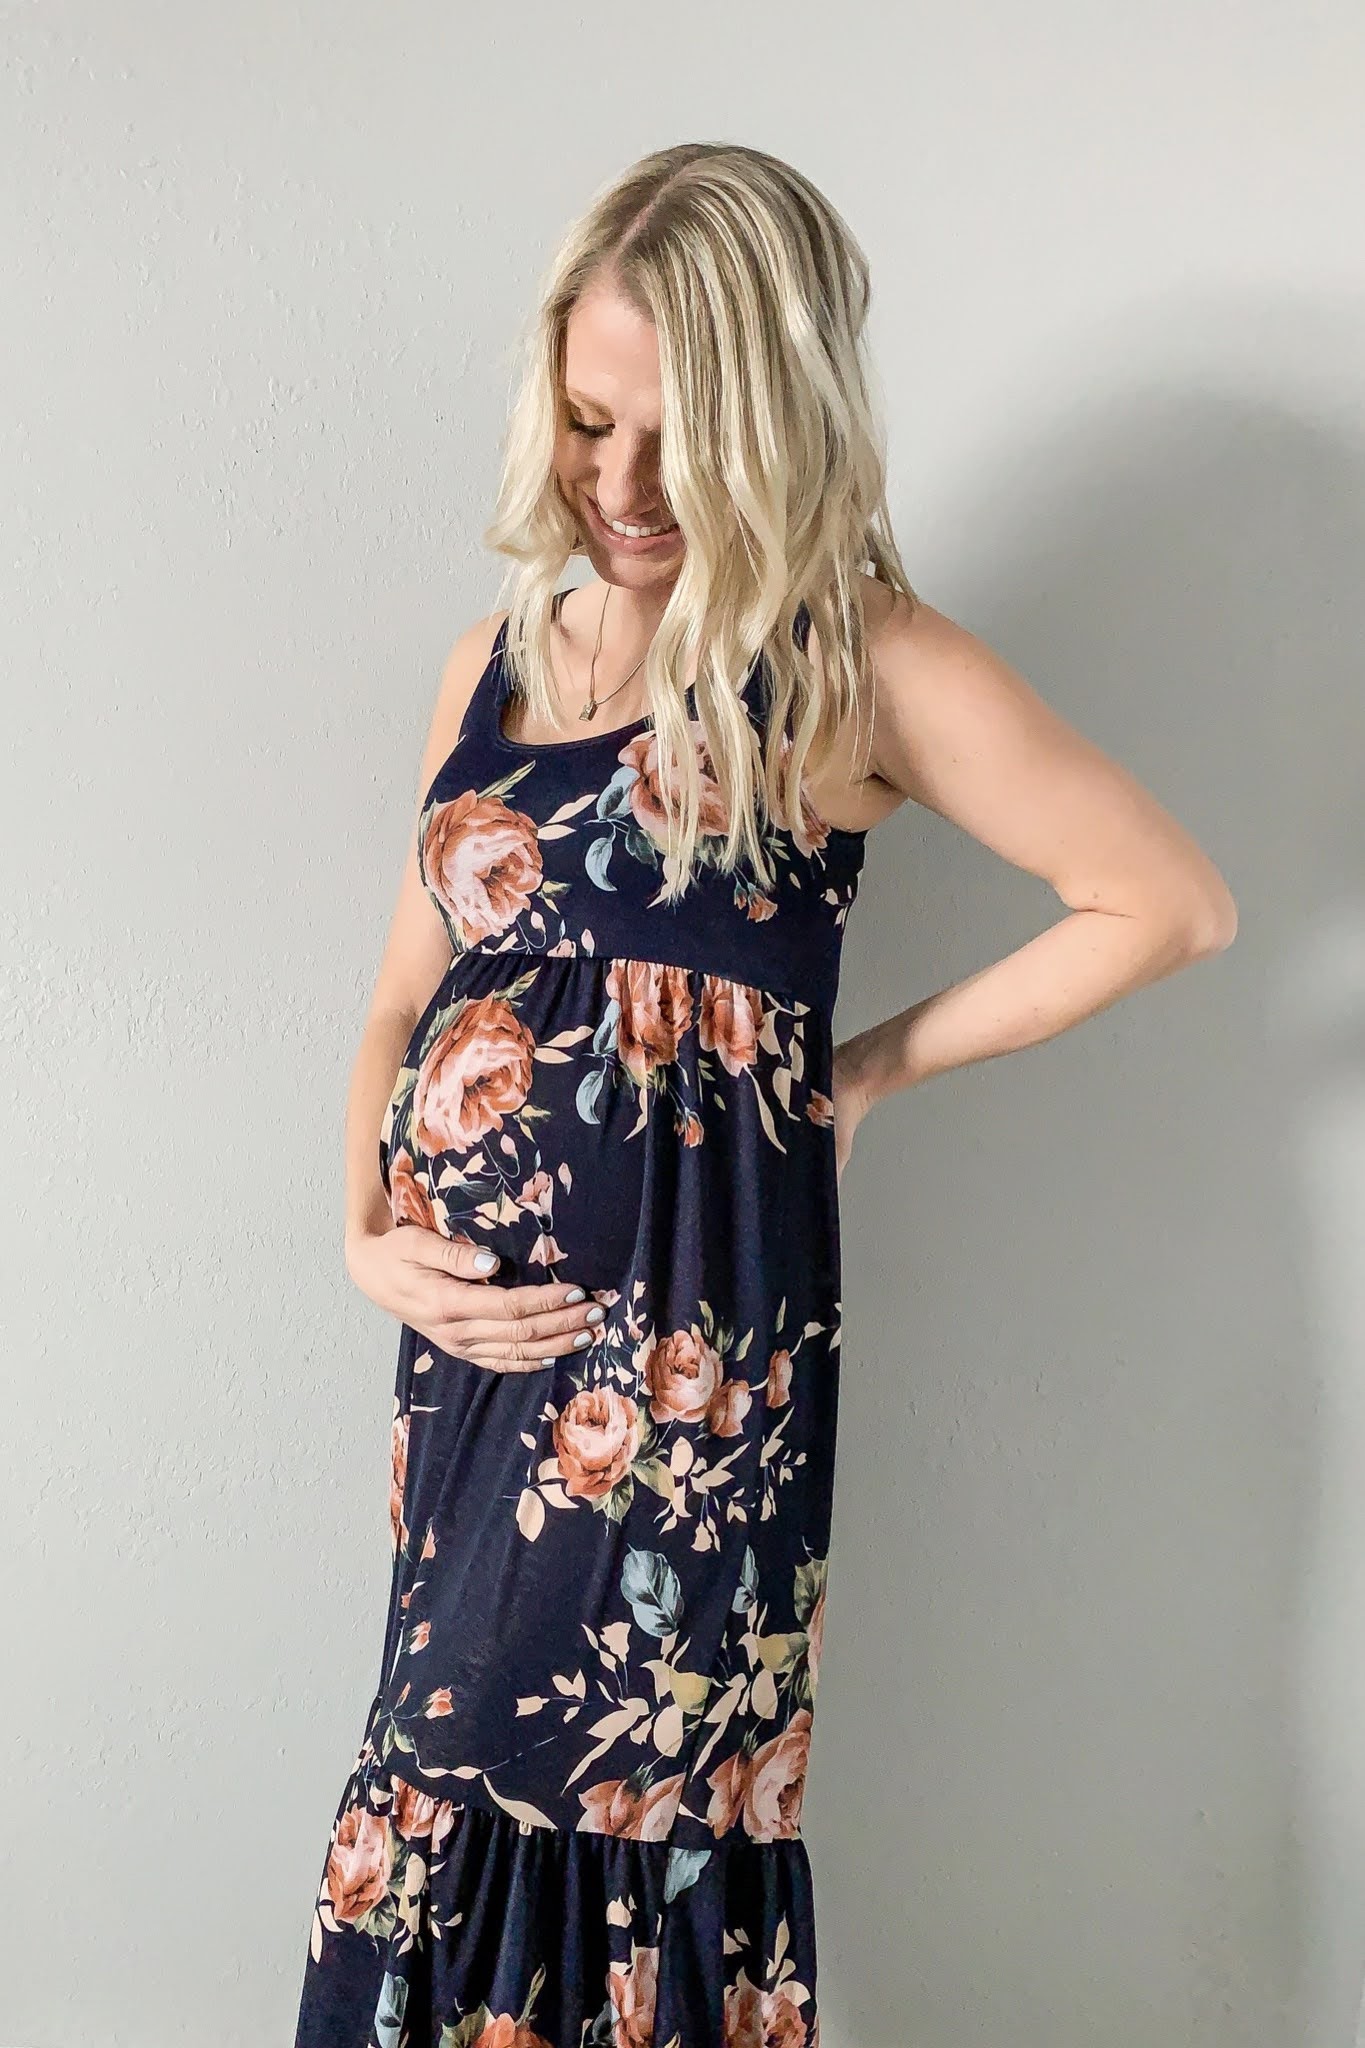 Buying maternity clothes on a budget